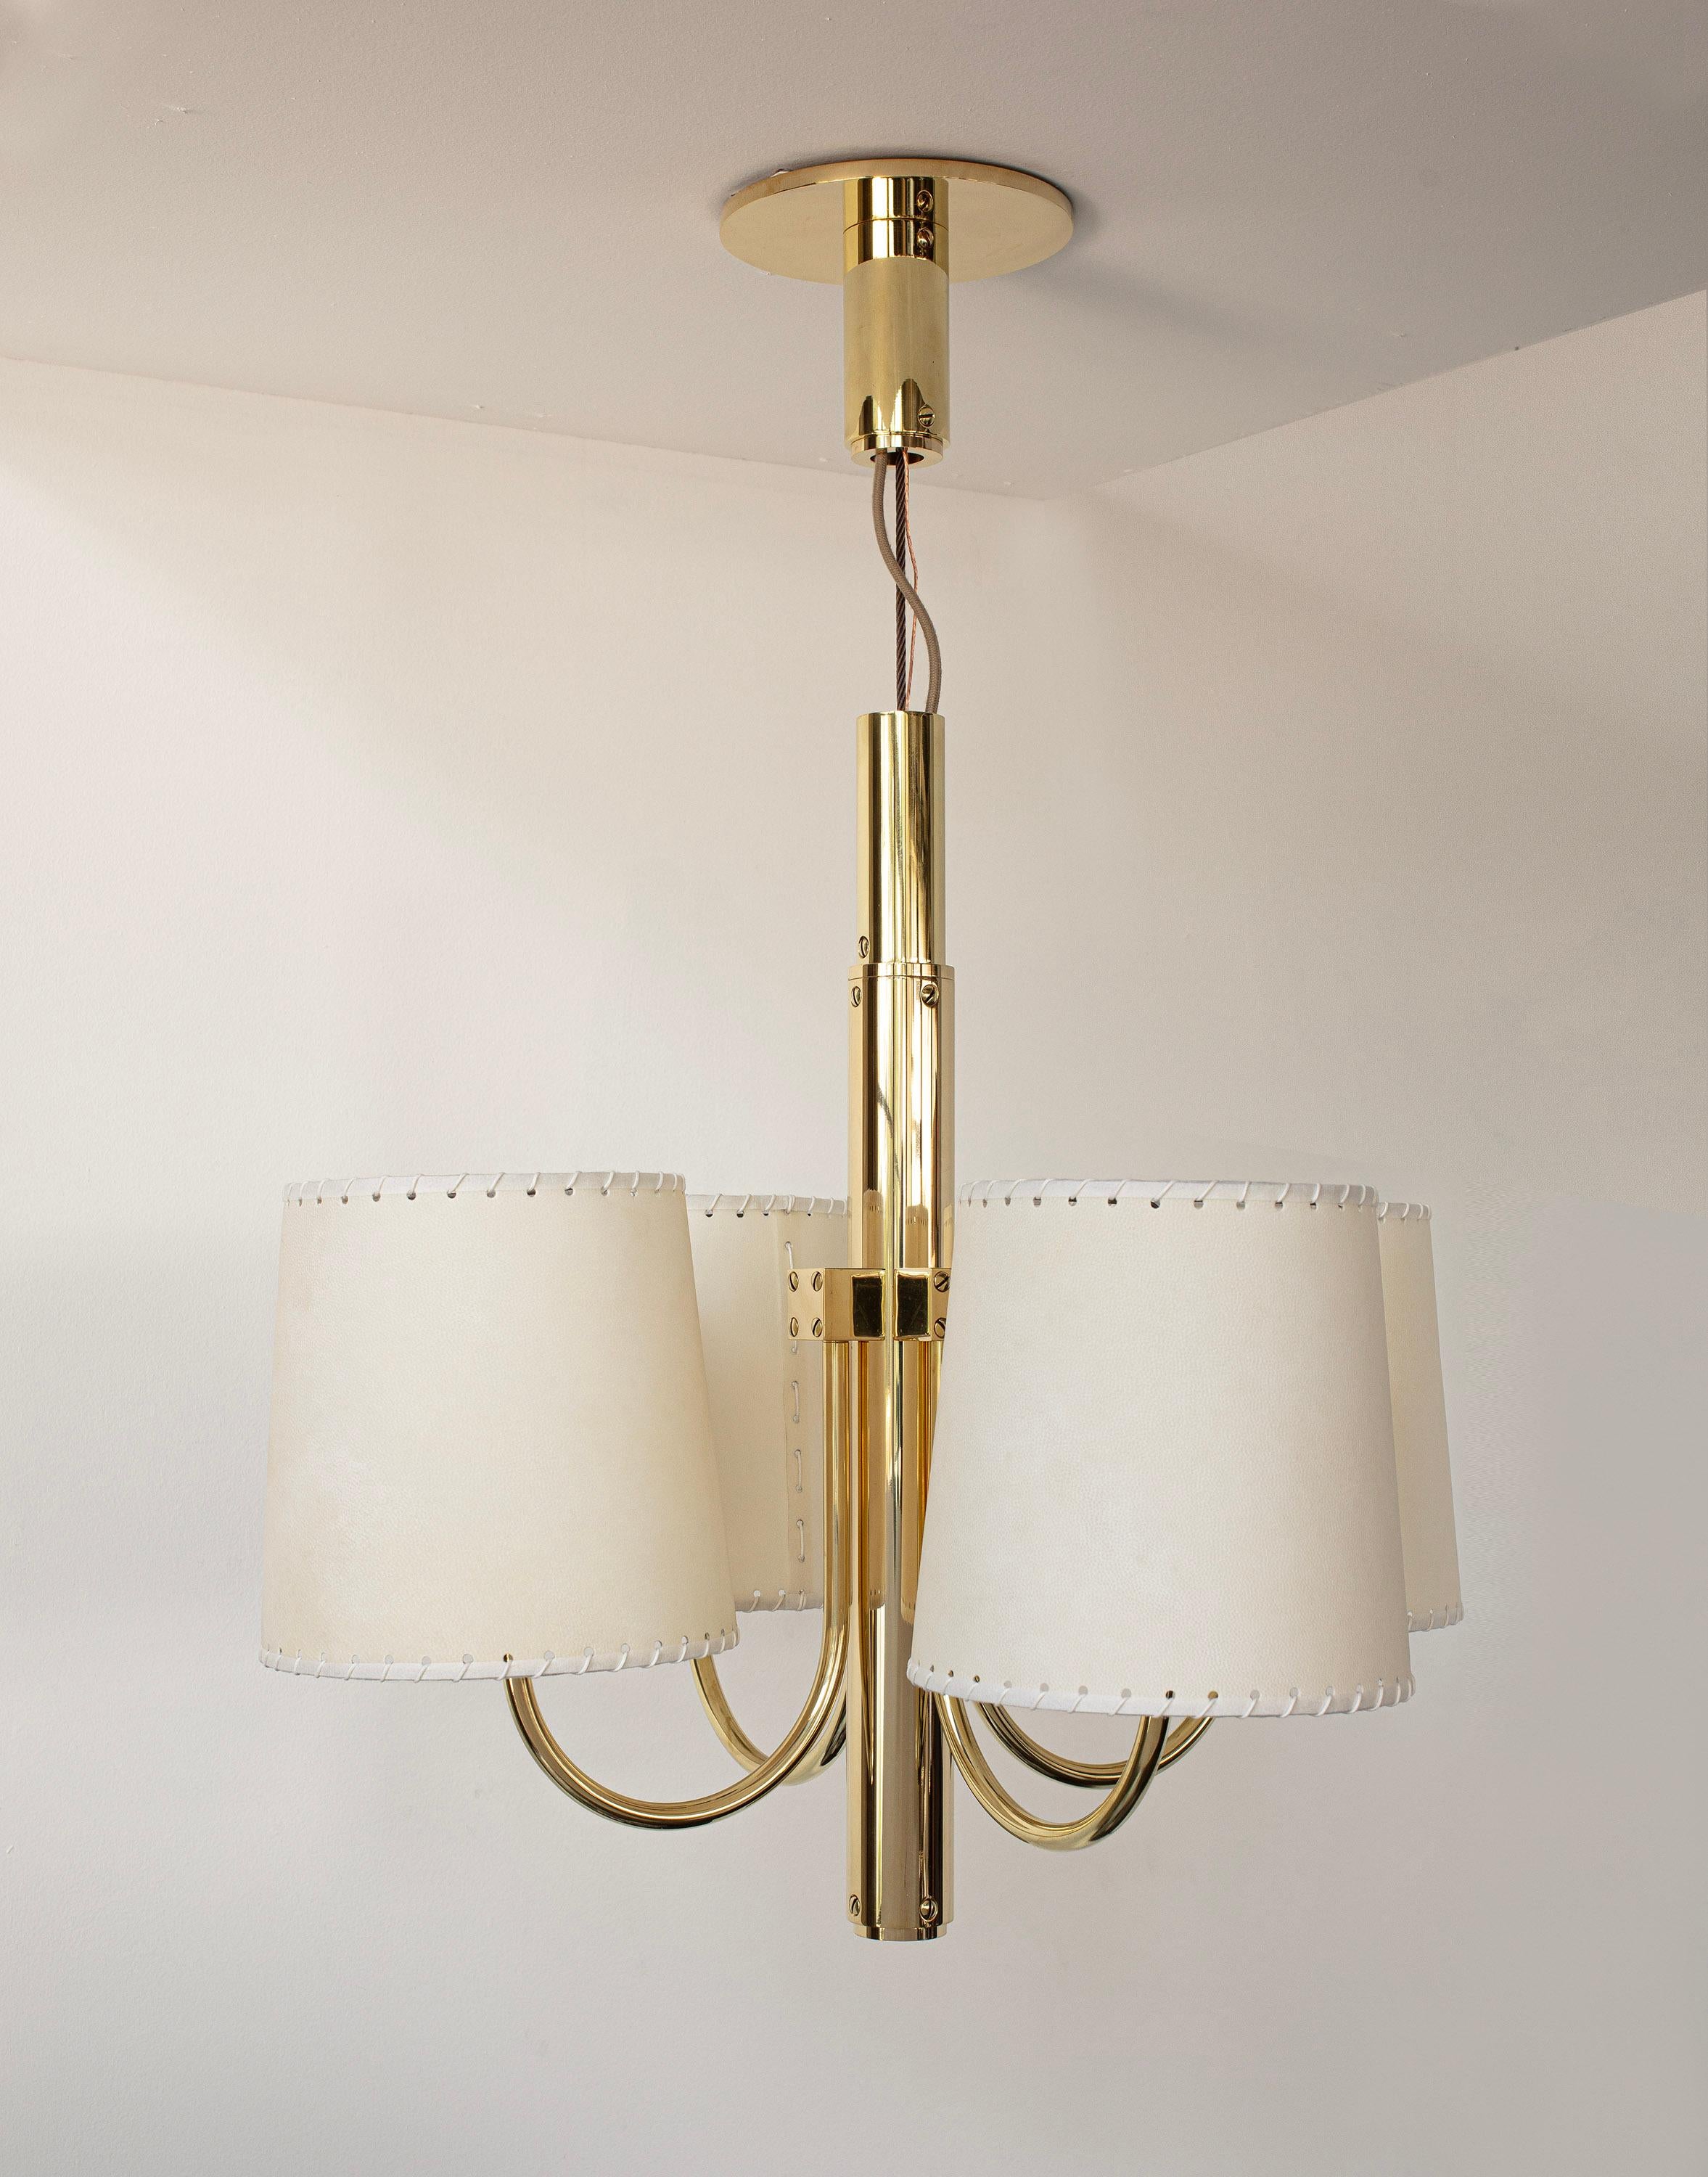 Contemporary S01 Upright Electrolier Polished Unlacquered Brass, Goatskin Parchment Shades For Sale